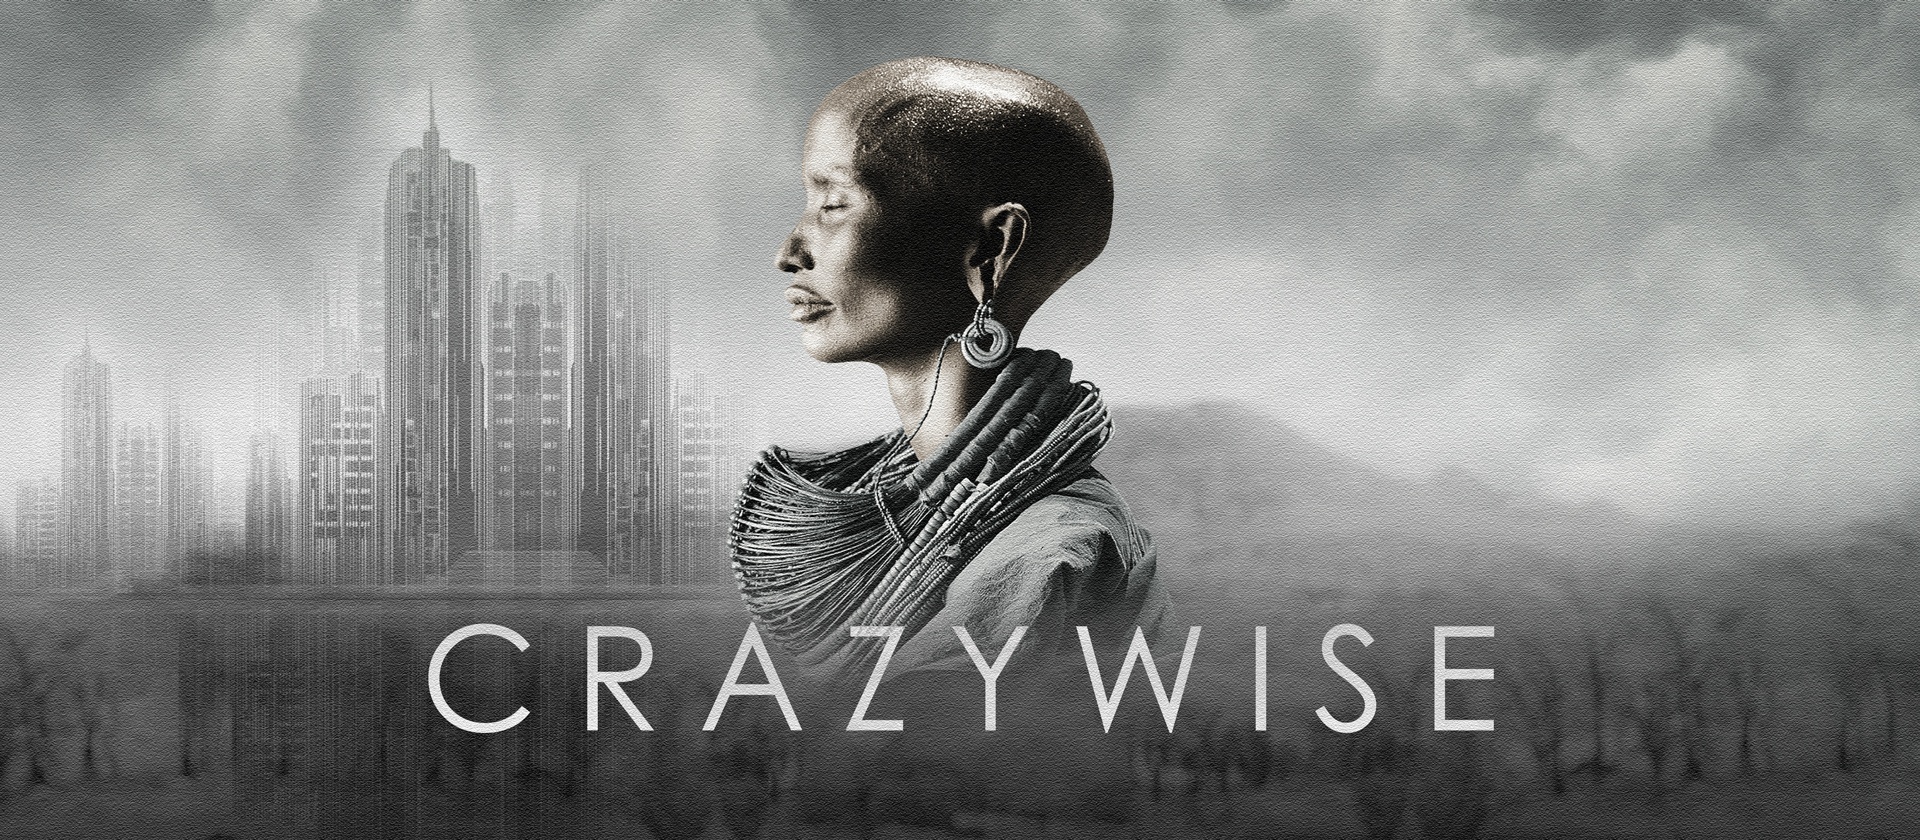 “Crazywise” - a film about culture and mental health